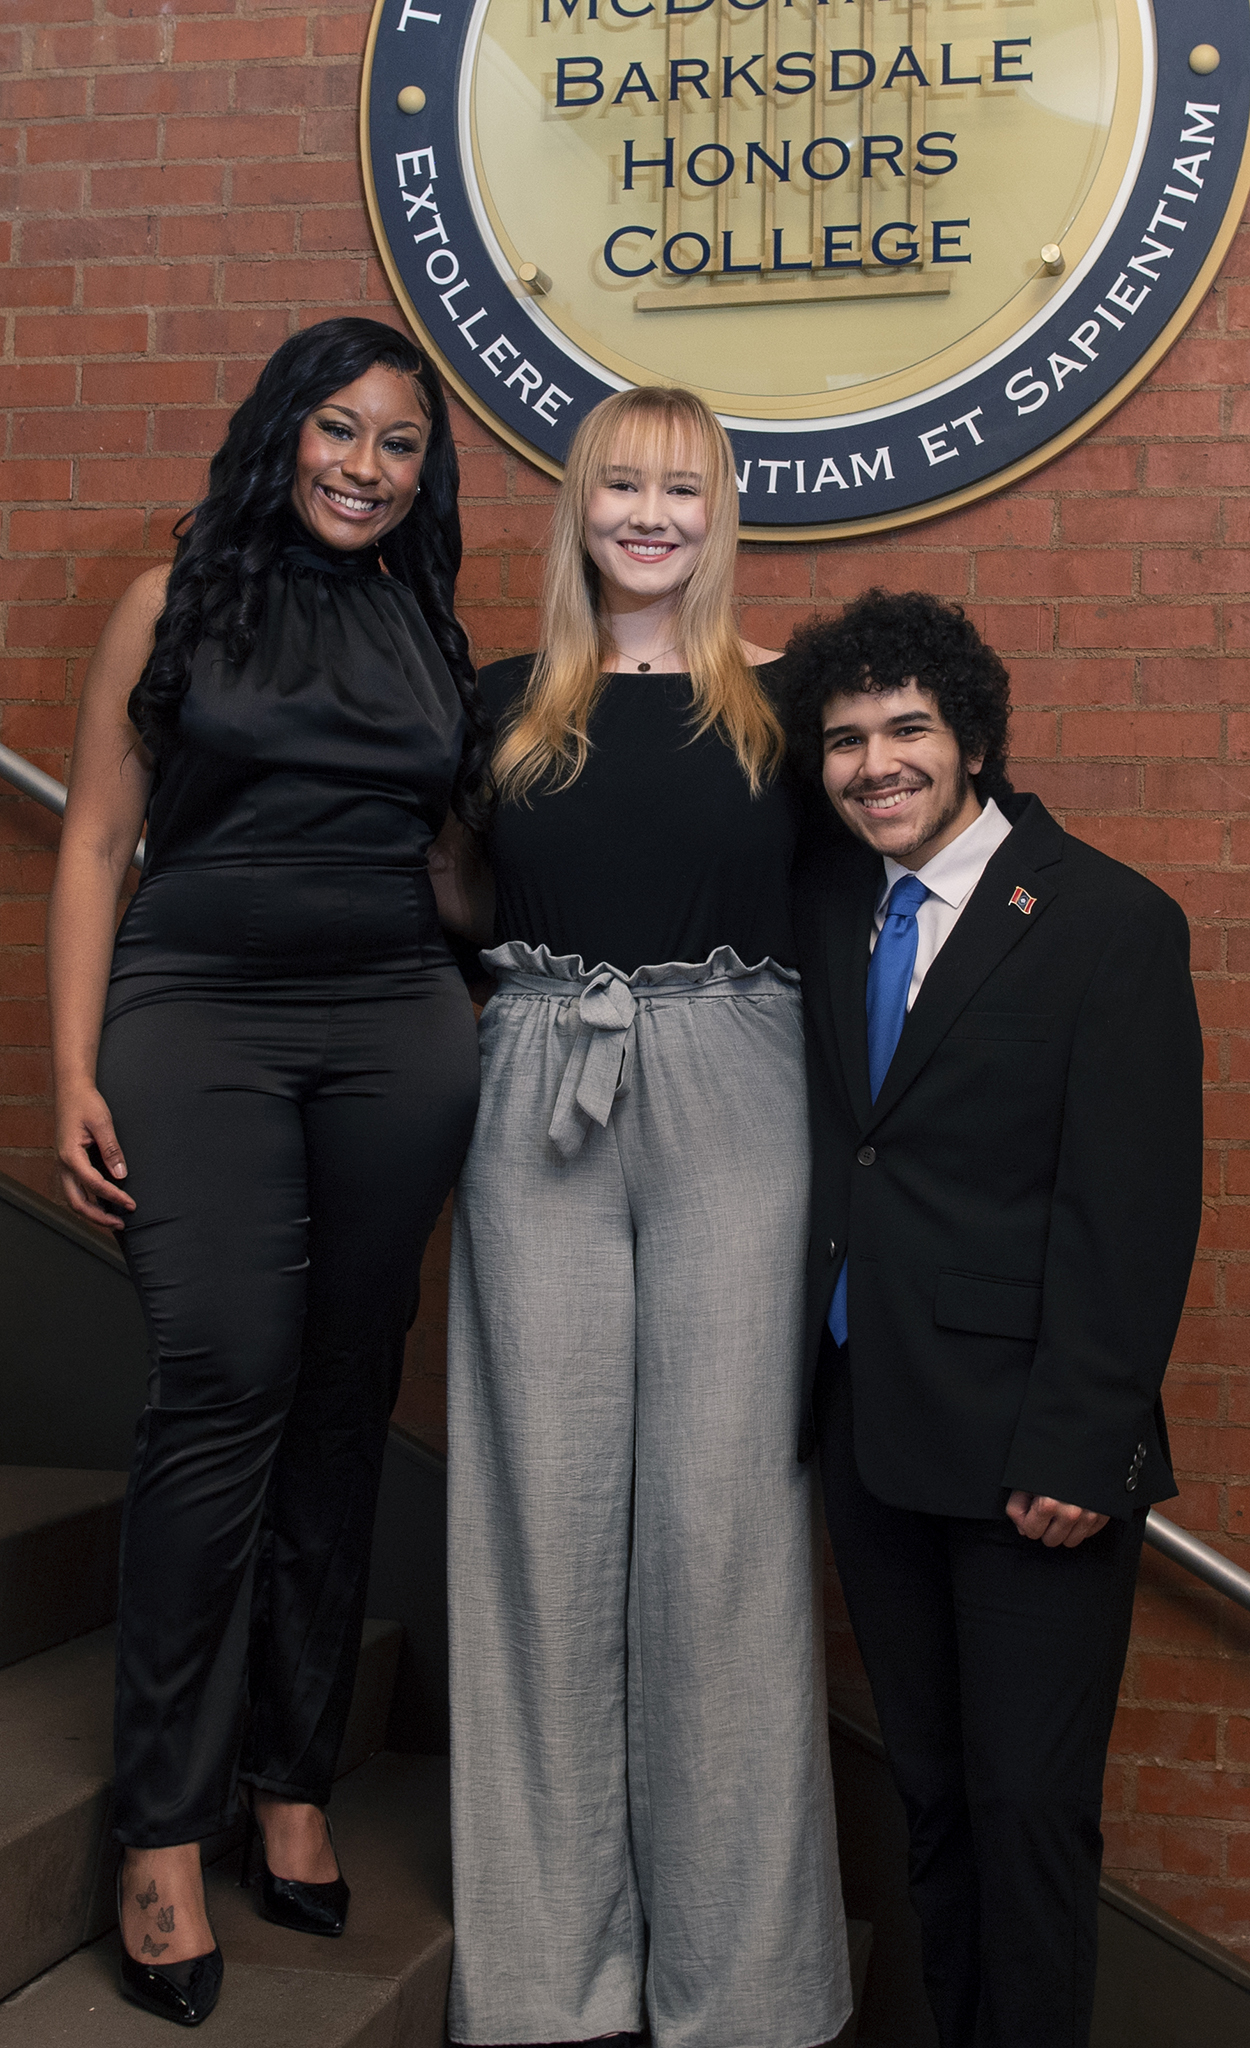 Jilkiah Bryant, Alex Bush, and Andy Flores pose smiling in front of the Sally Barksdale Honors College